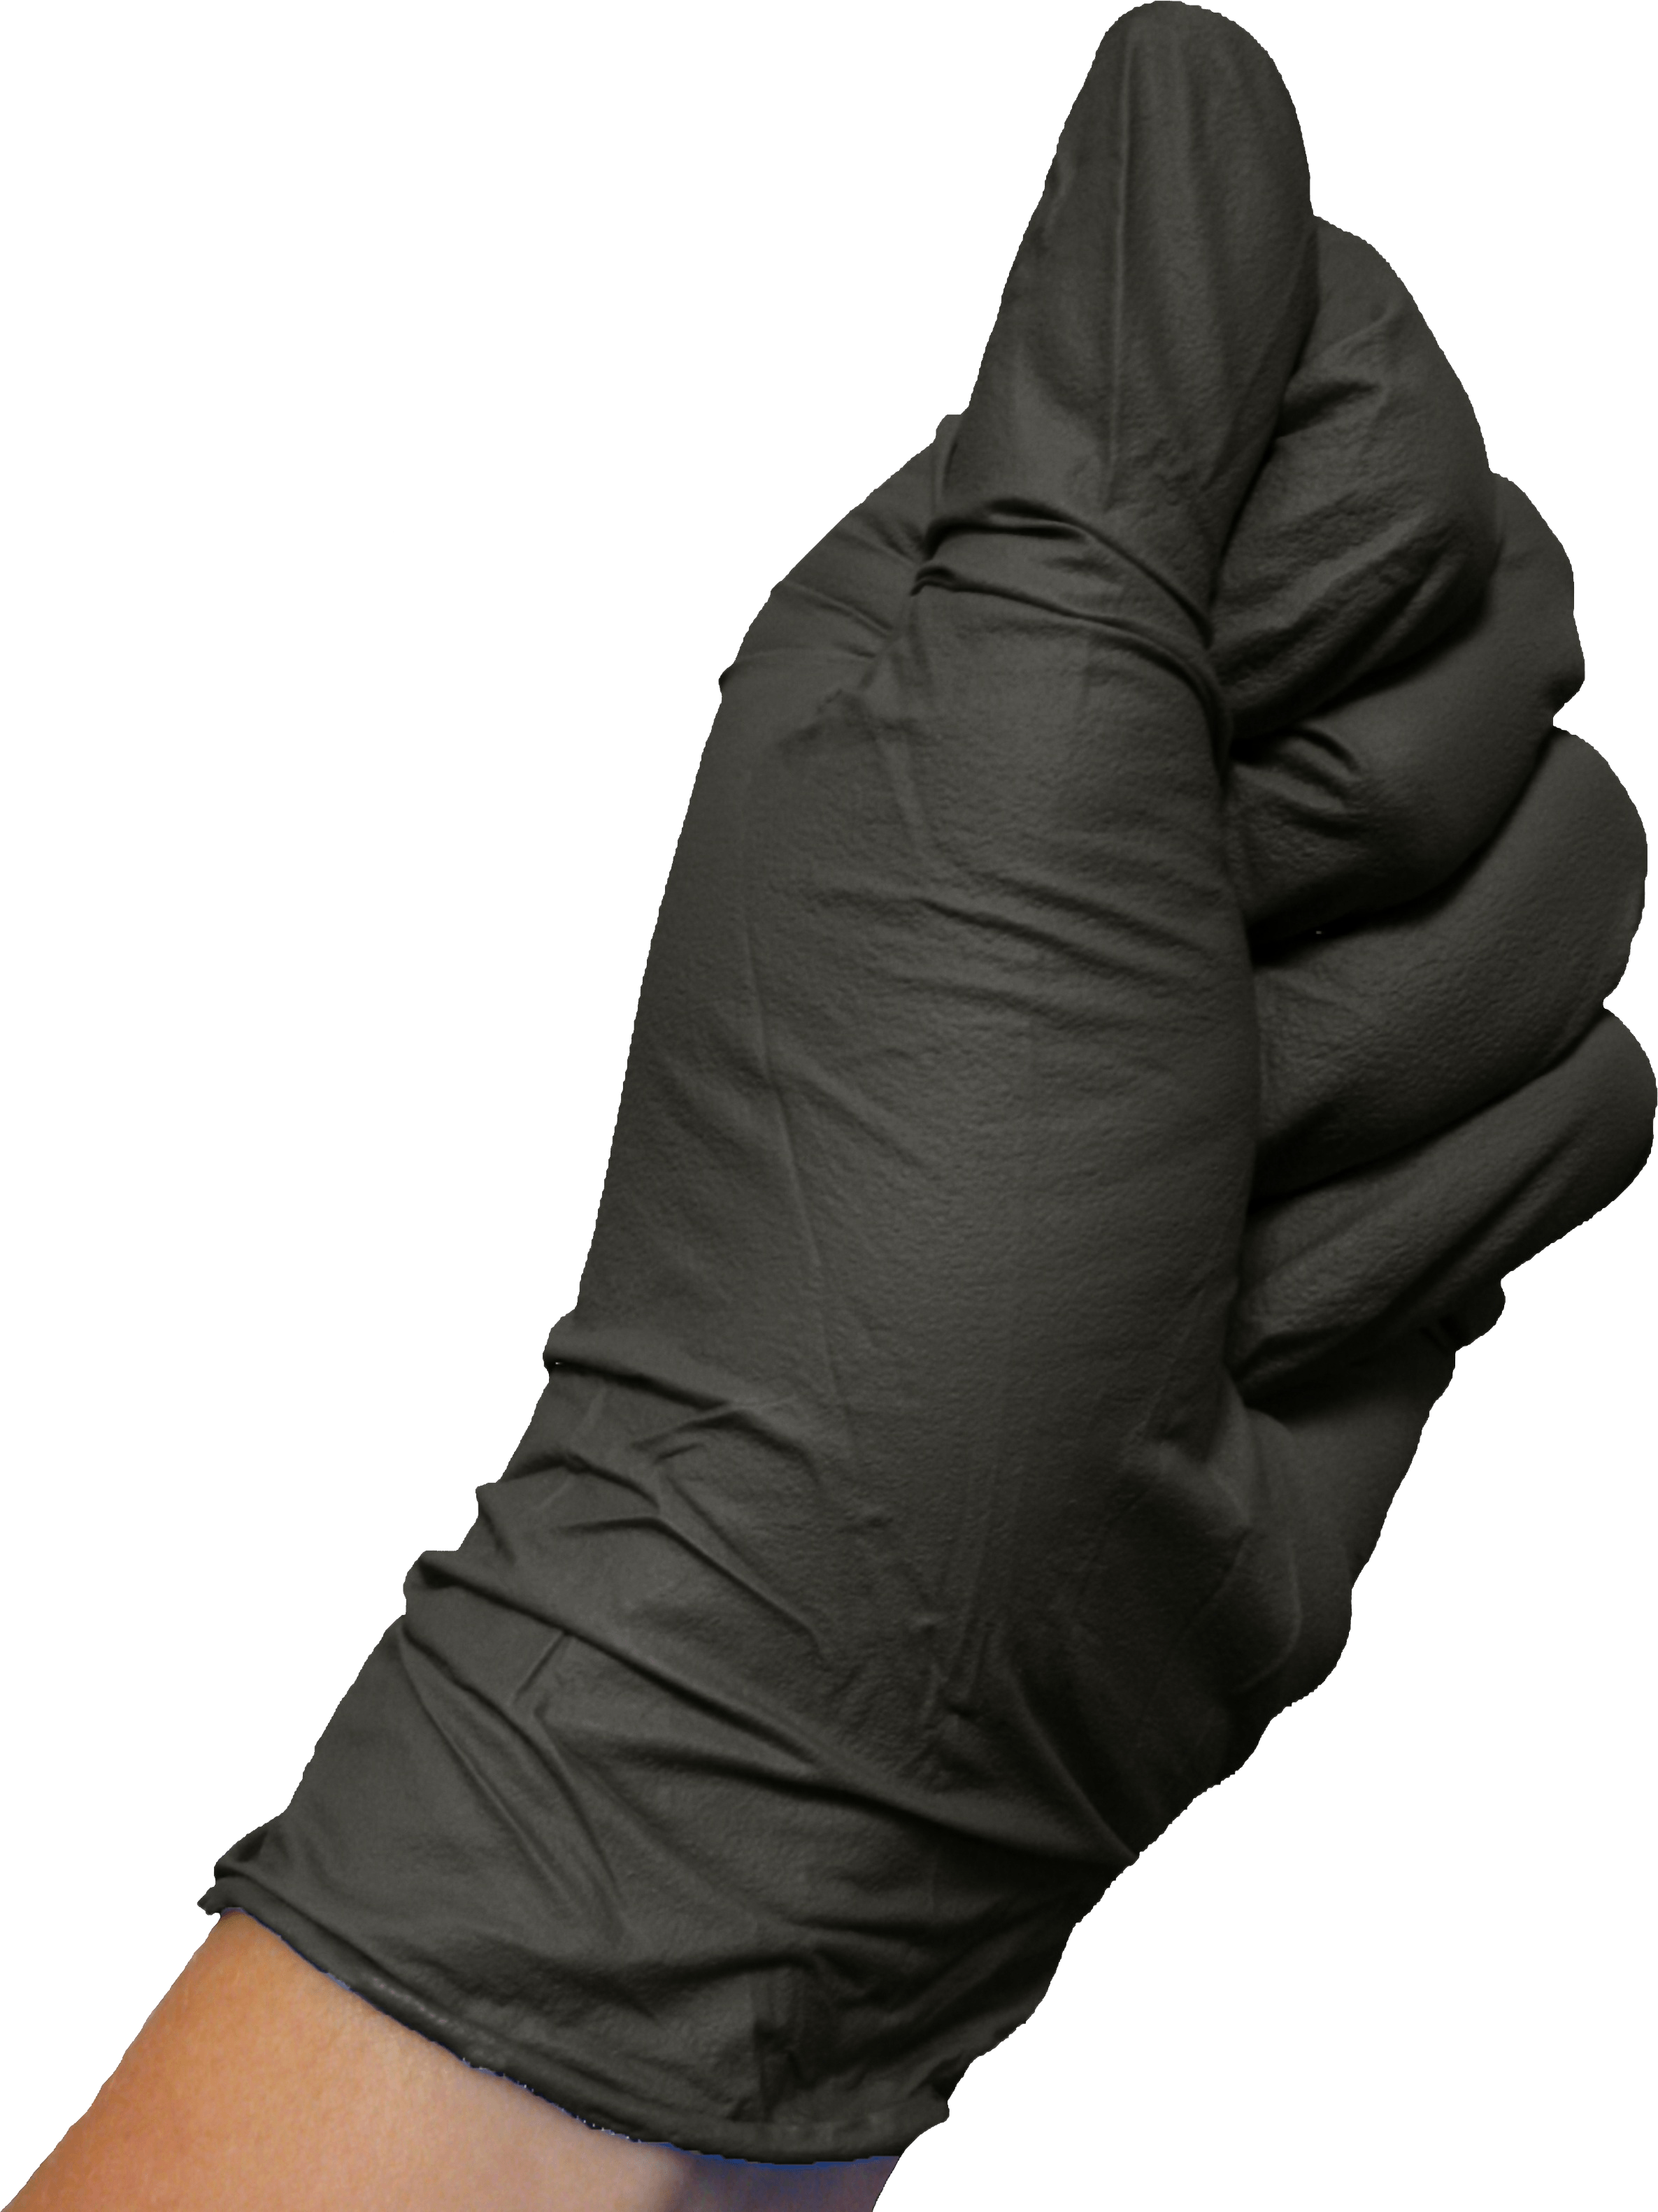 Glove On Hand Png Image PNG Image